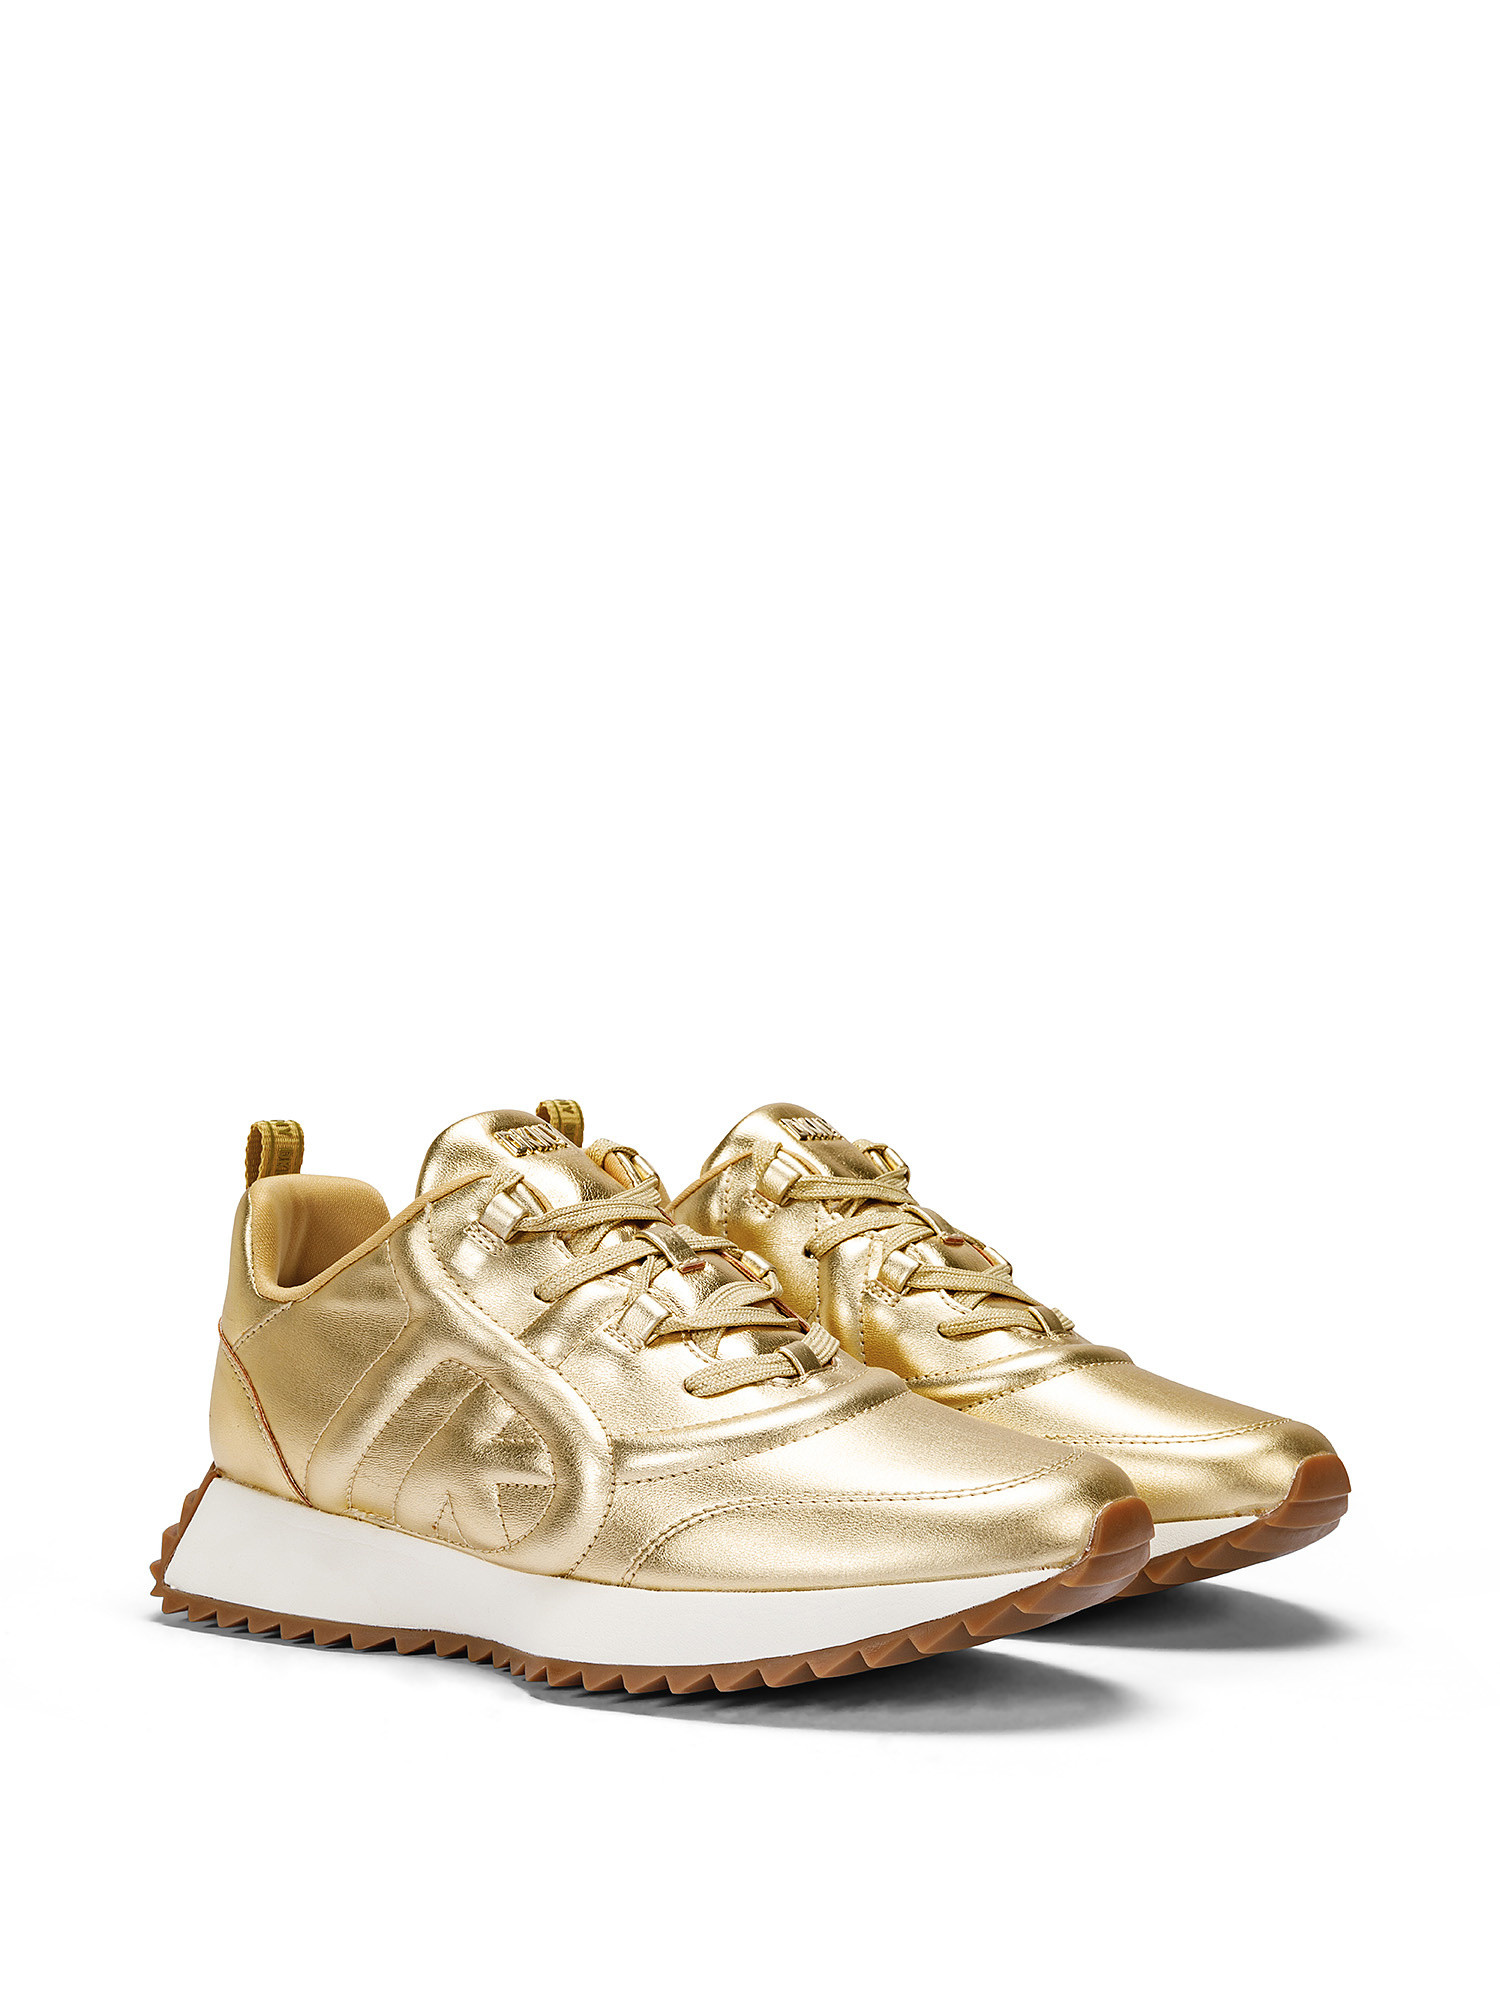 DKNY - Sneakers NIX, Gold, large image number 1